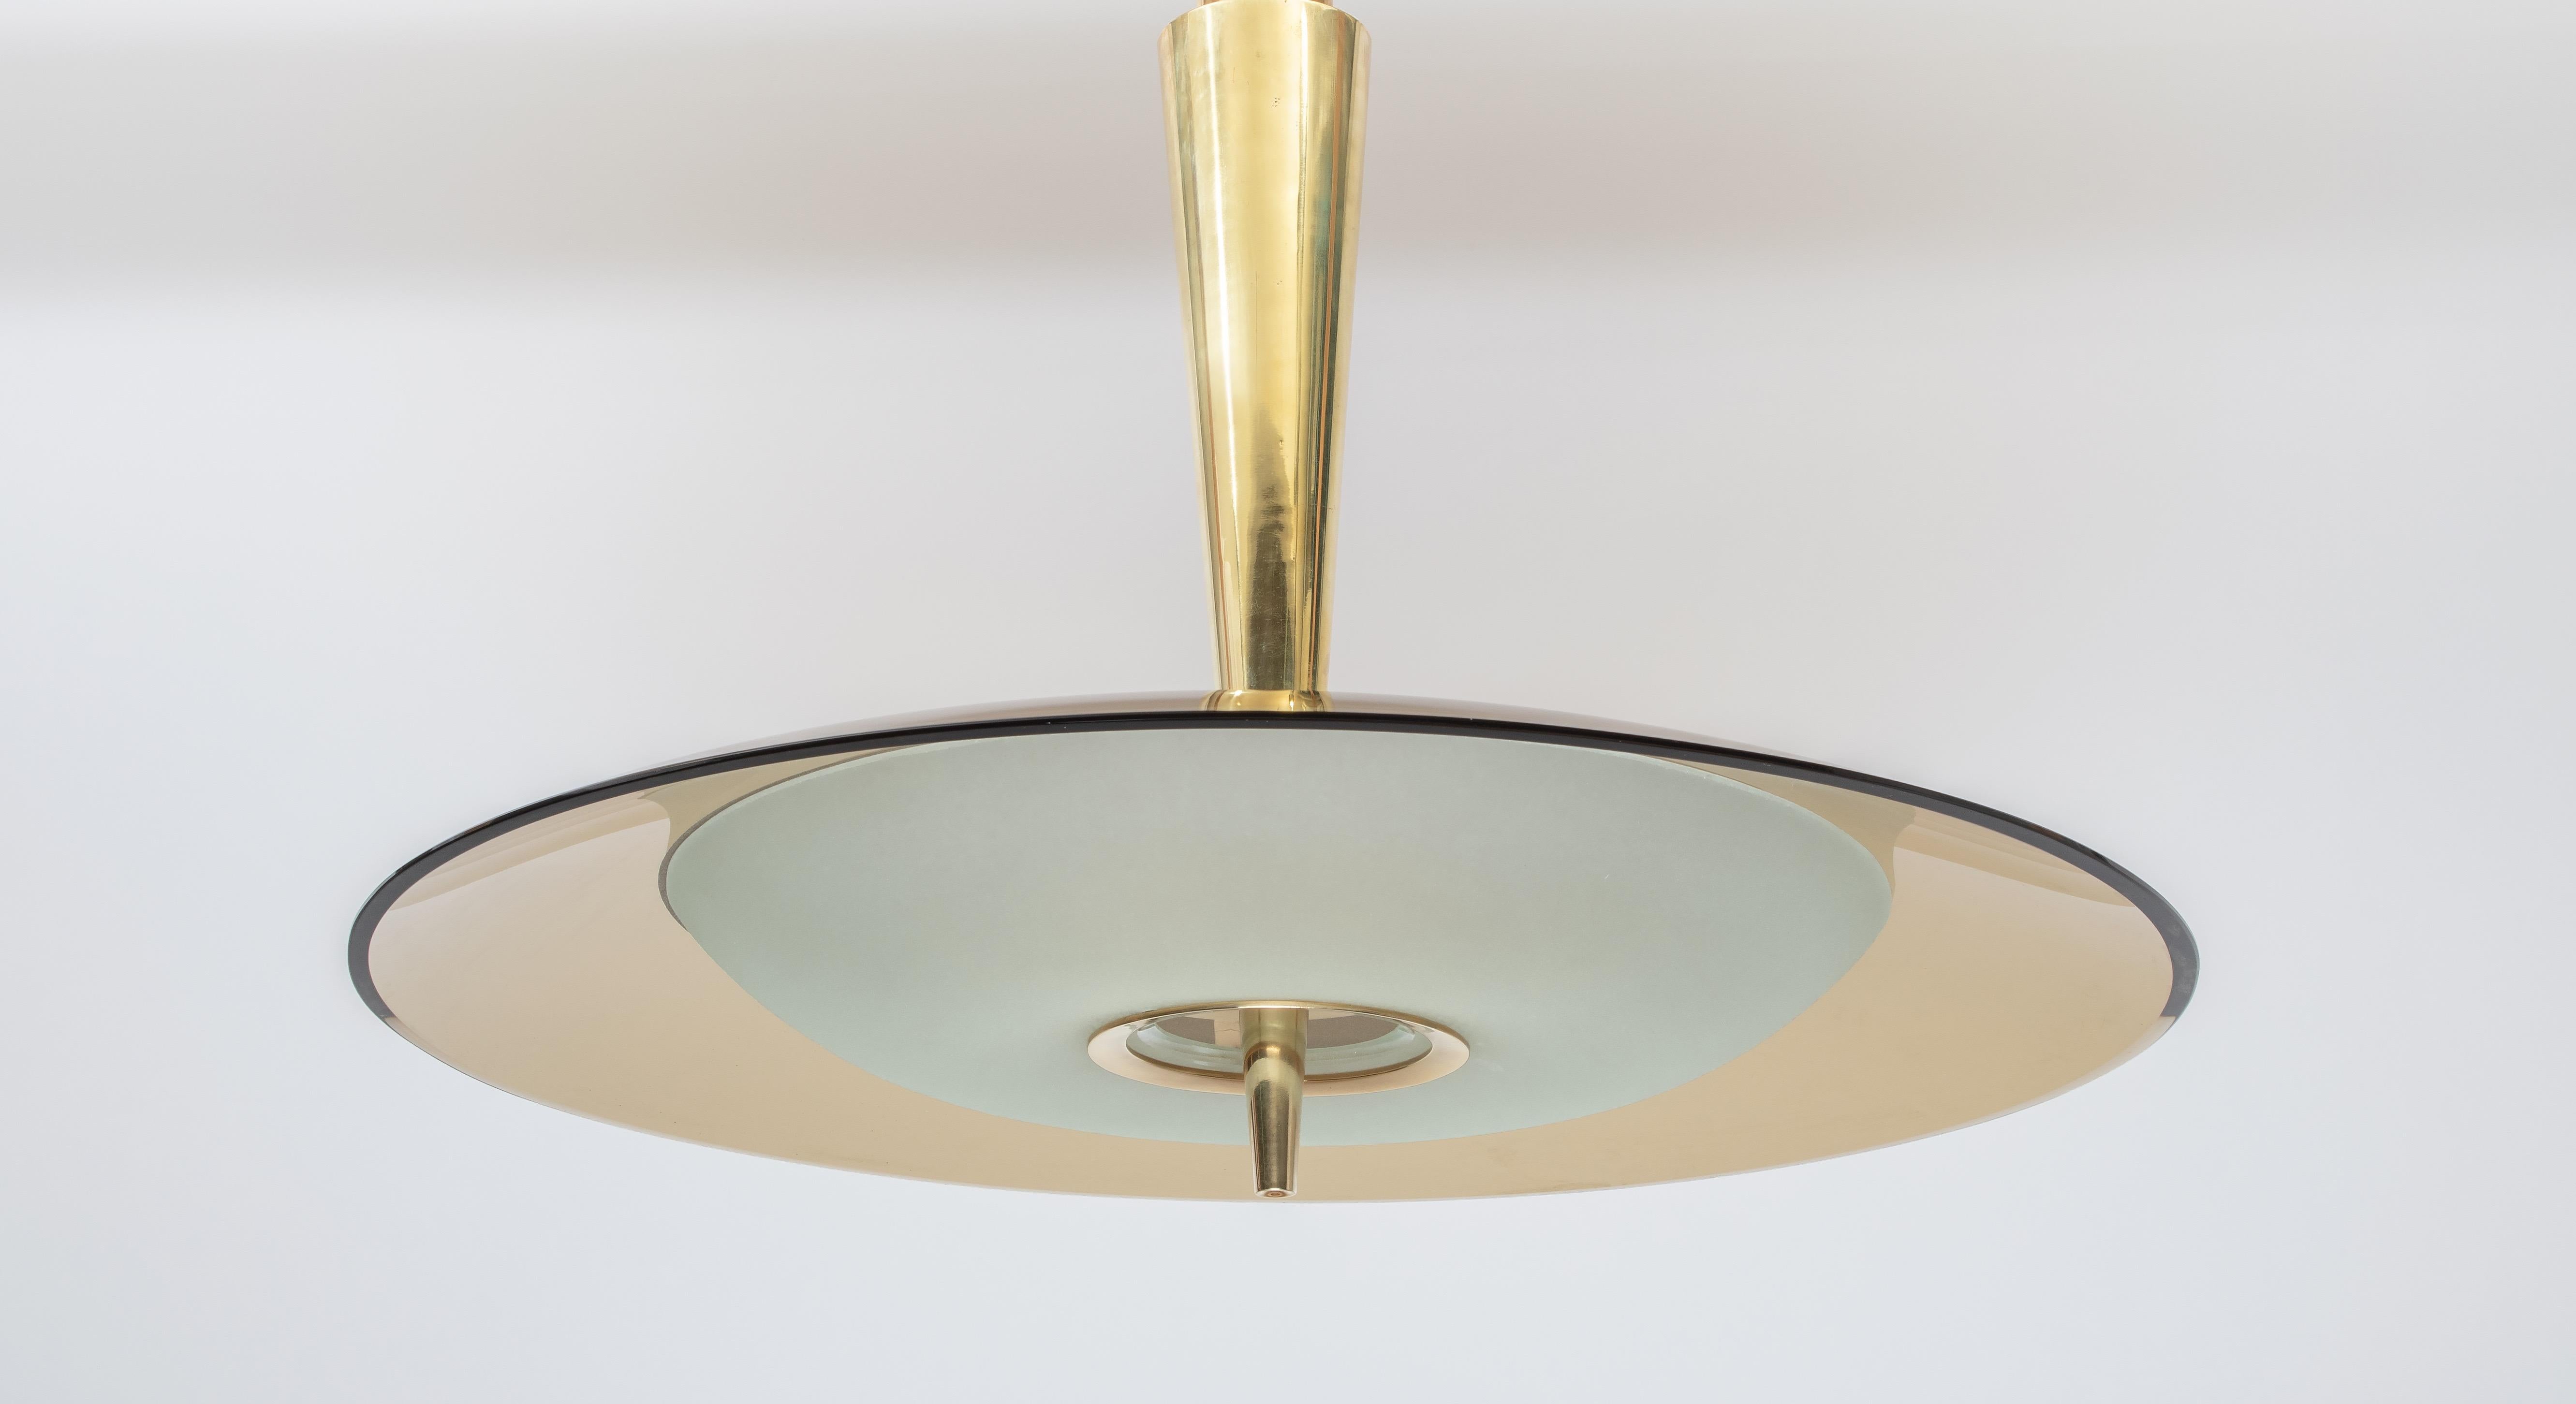 Exquisite Max Ingrand for Fontana Arte Round Glass Chandelier, Italy 1950's (Mitte des 20. Jahrhunderts)